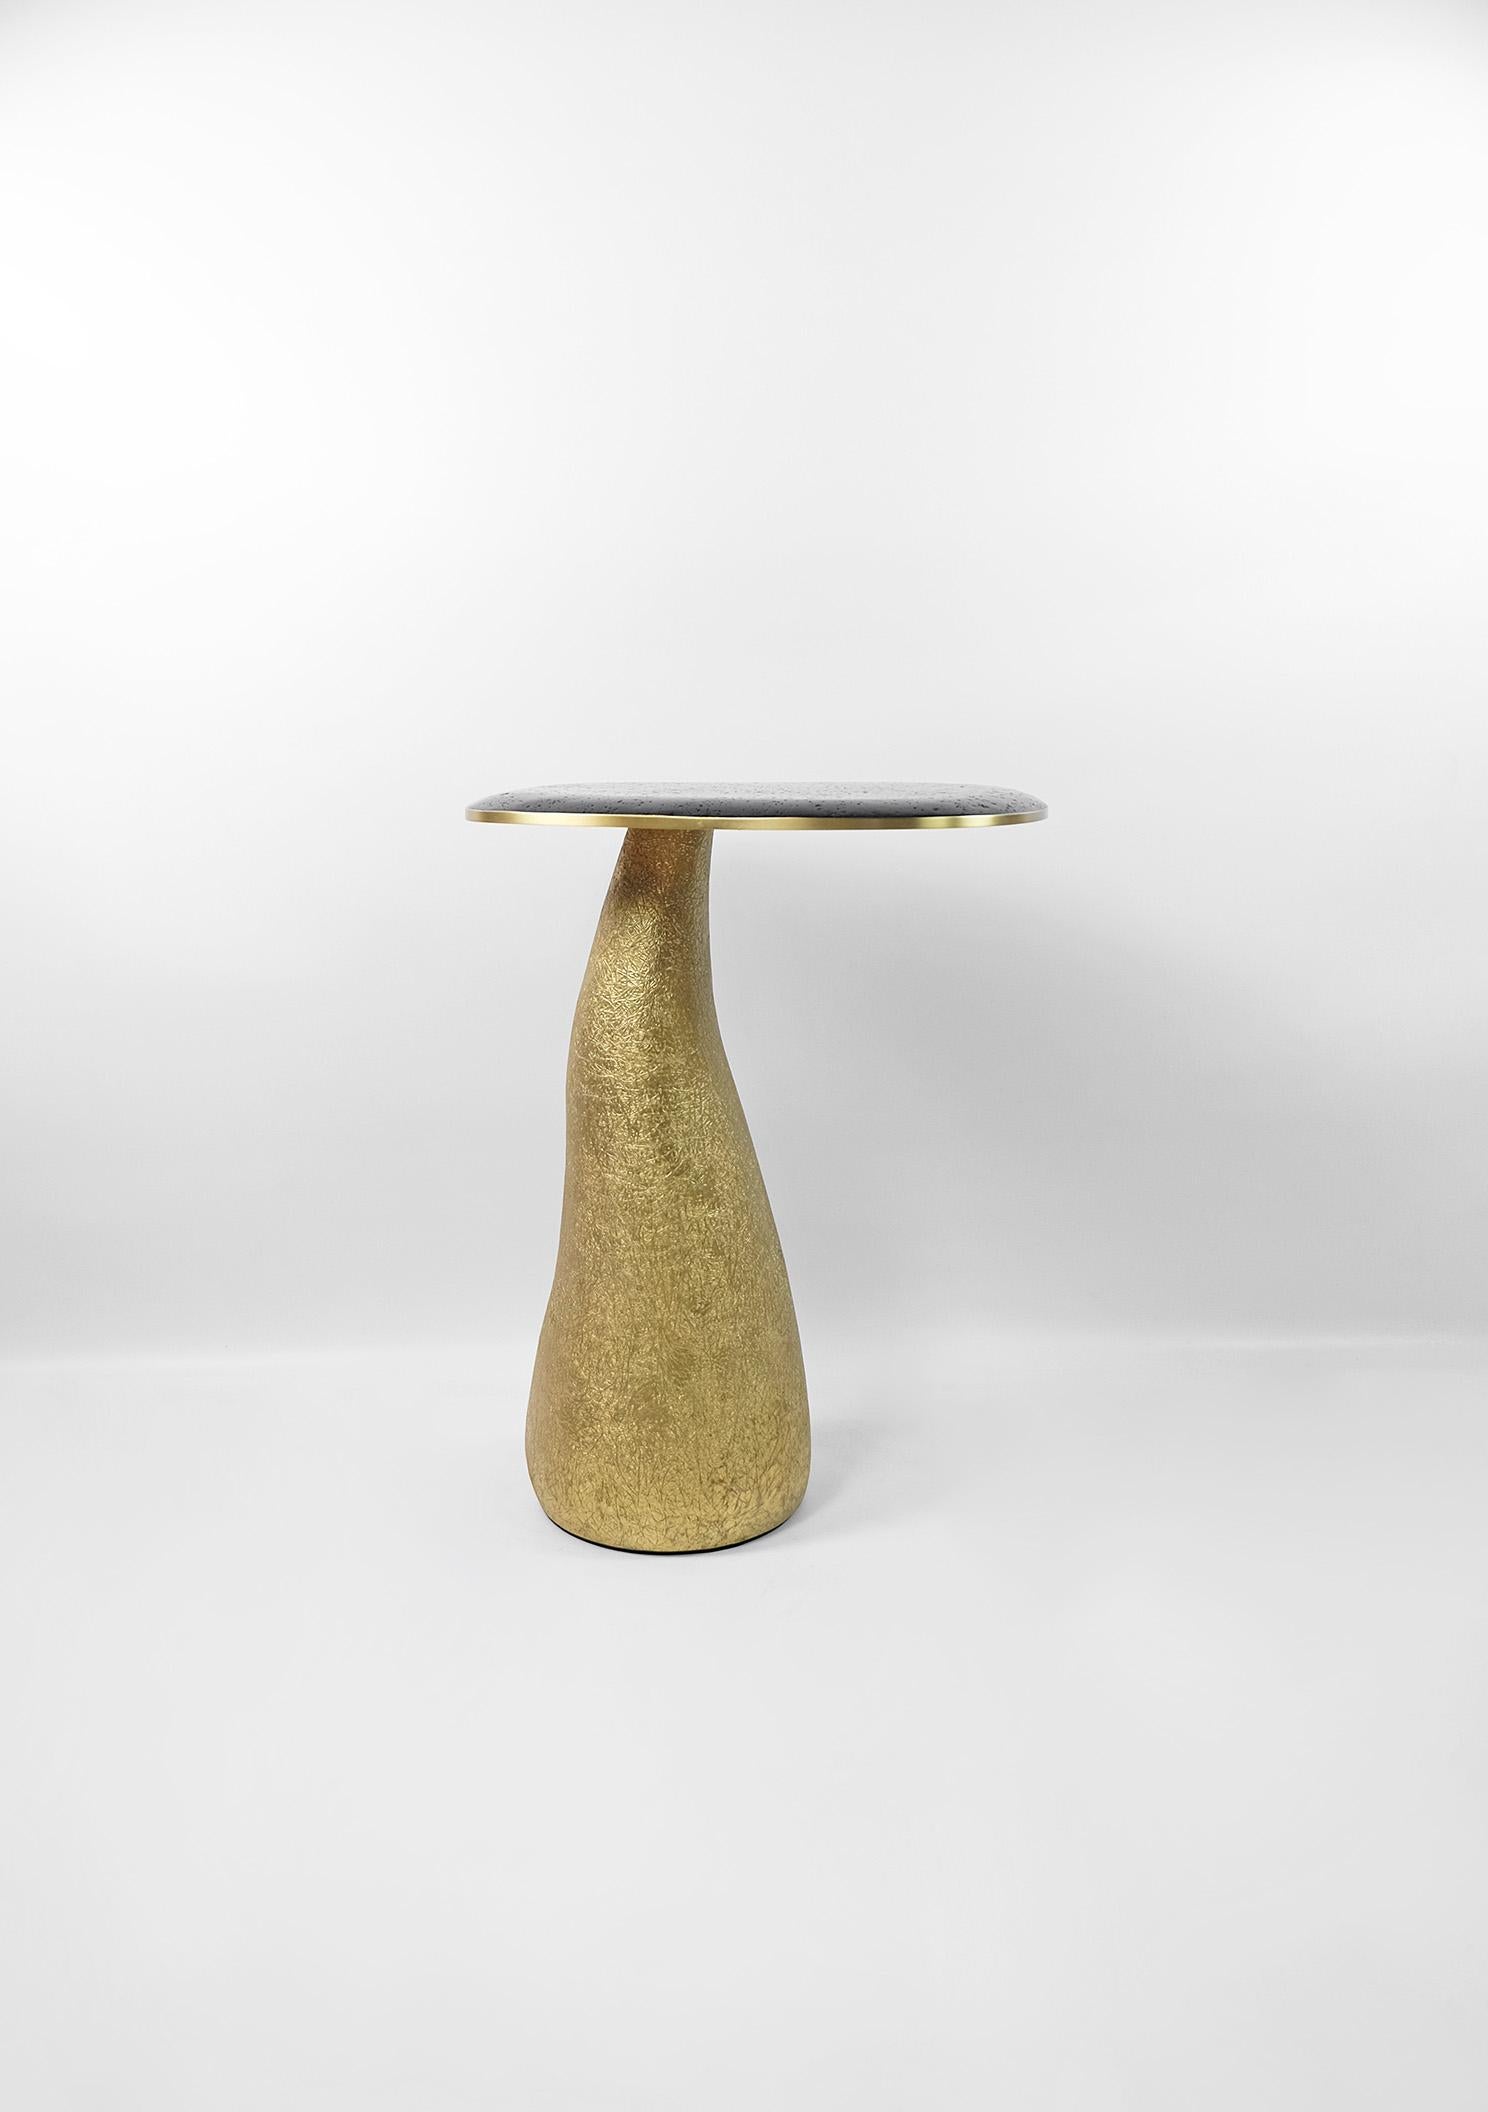 This side table is made of a lava stone marquetry top with brass trims.
The base is made of wood with a gilded semi-raw glass fiber inlaying.
The semi raw finishing brings an interesting texture thanks to the nice organic shape of the tables.

The